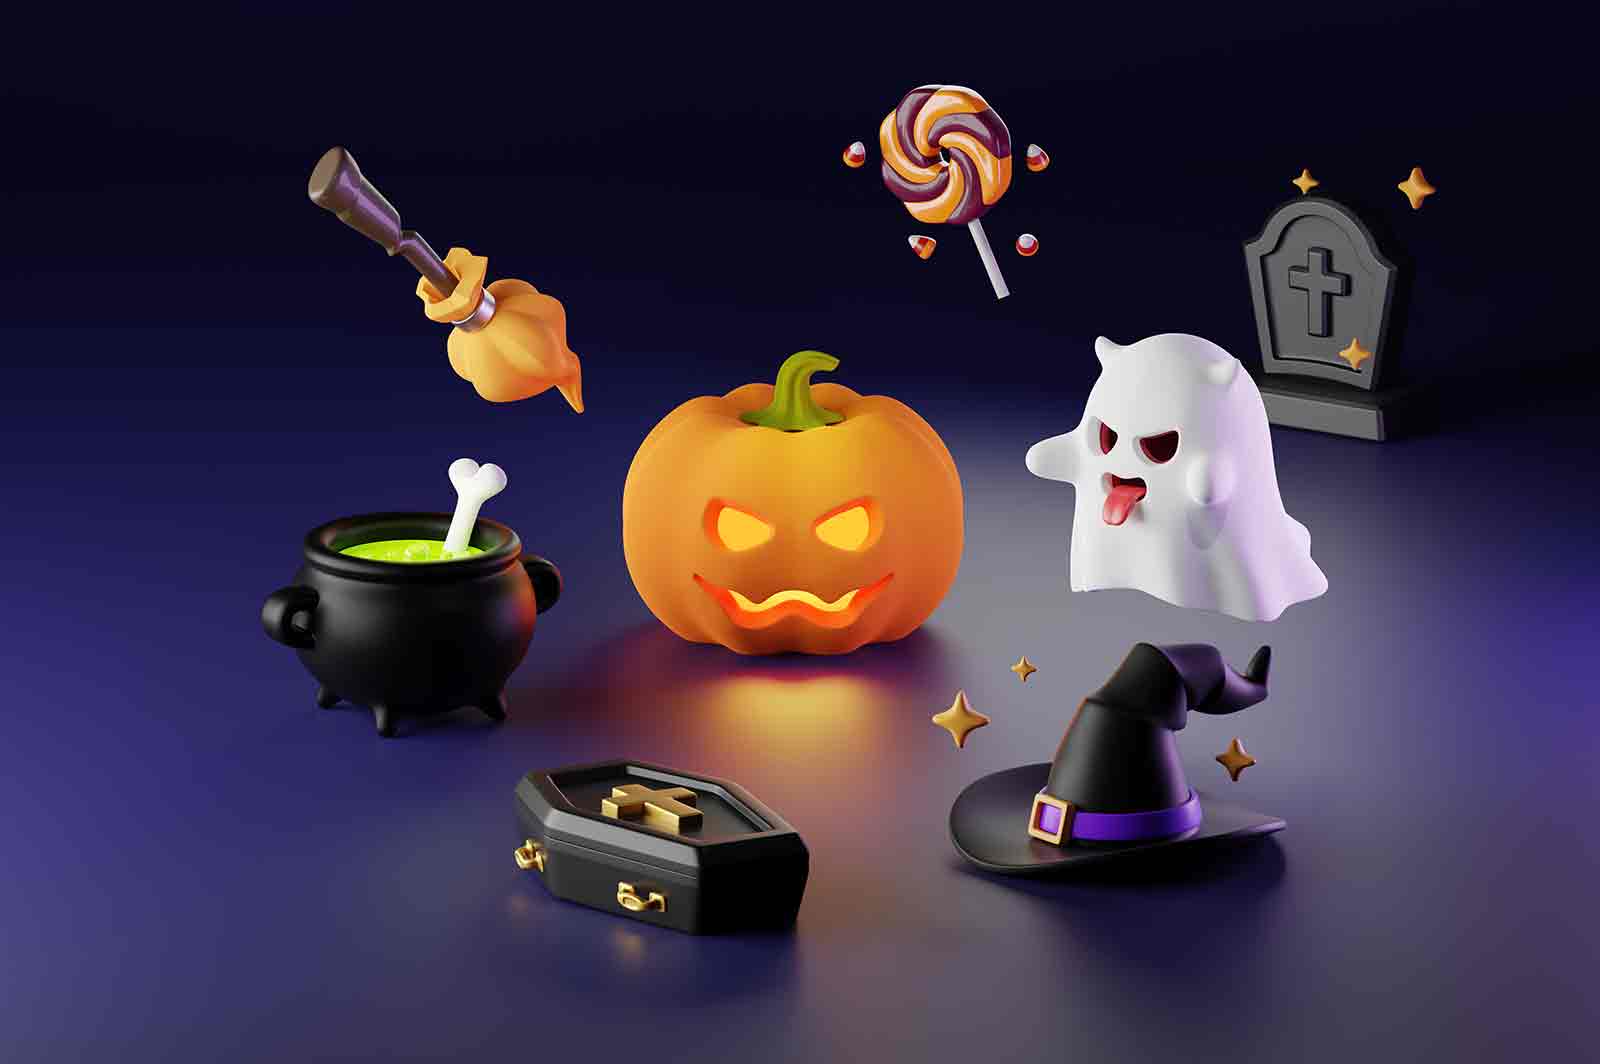 Free download Halloween 3D rendered illustration. Halloween atributes and objects with puimpkin in the center of composition on dark background.